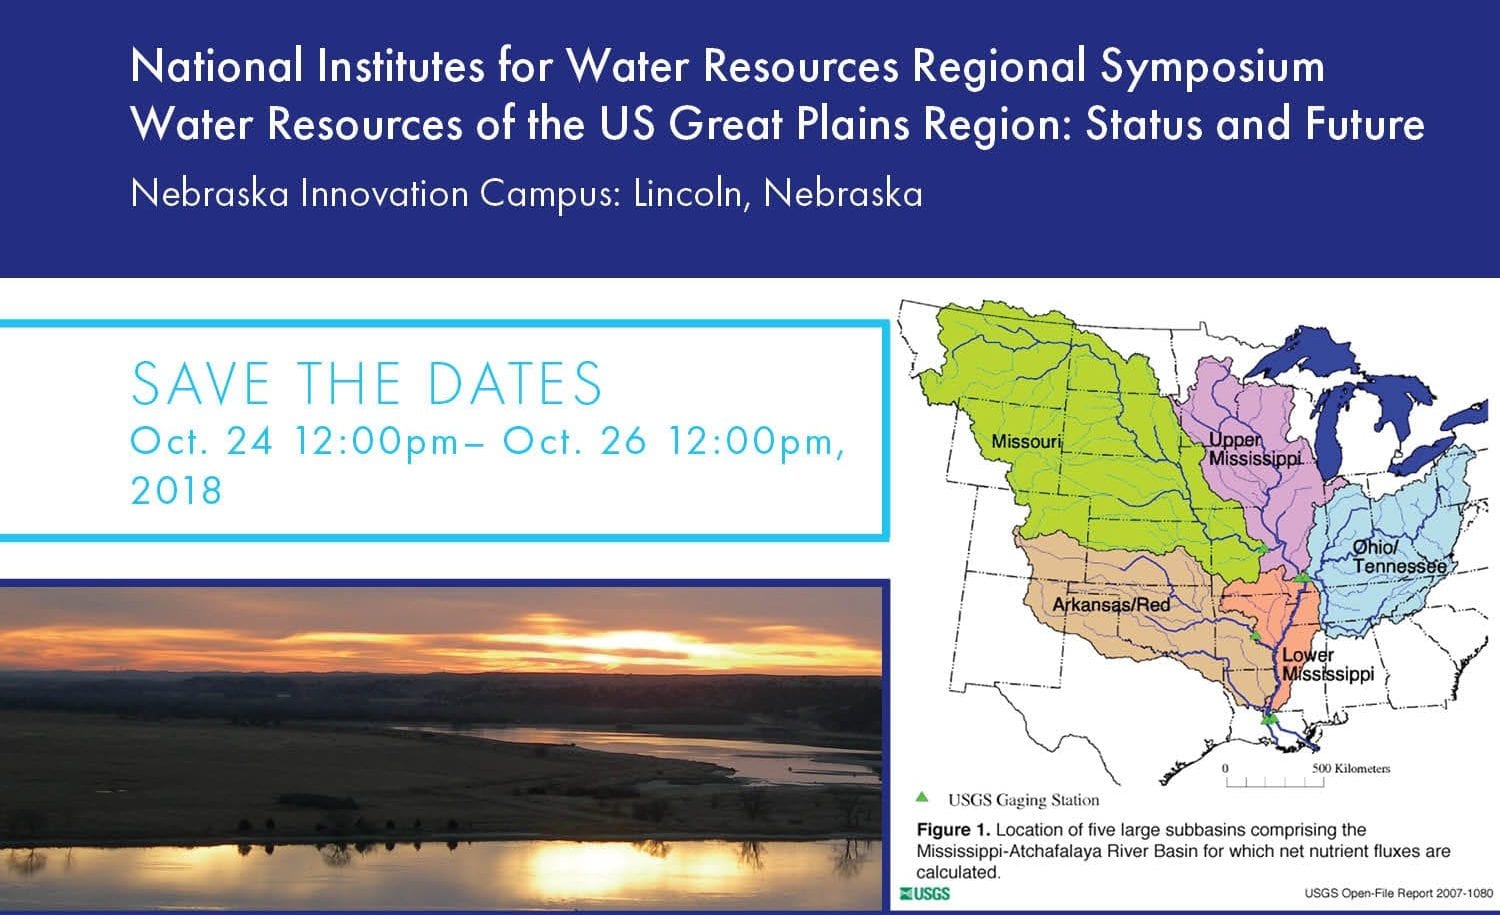 Great Plains Regional Symposium on Water Resources Slated for October 24-26